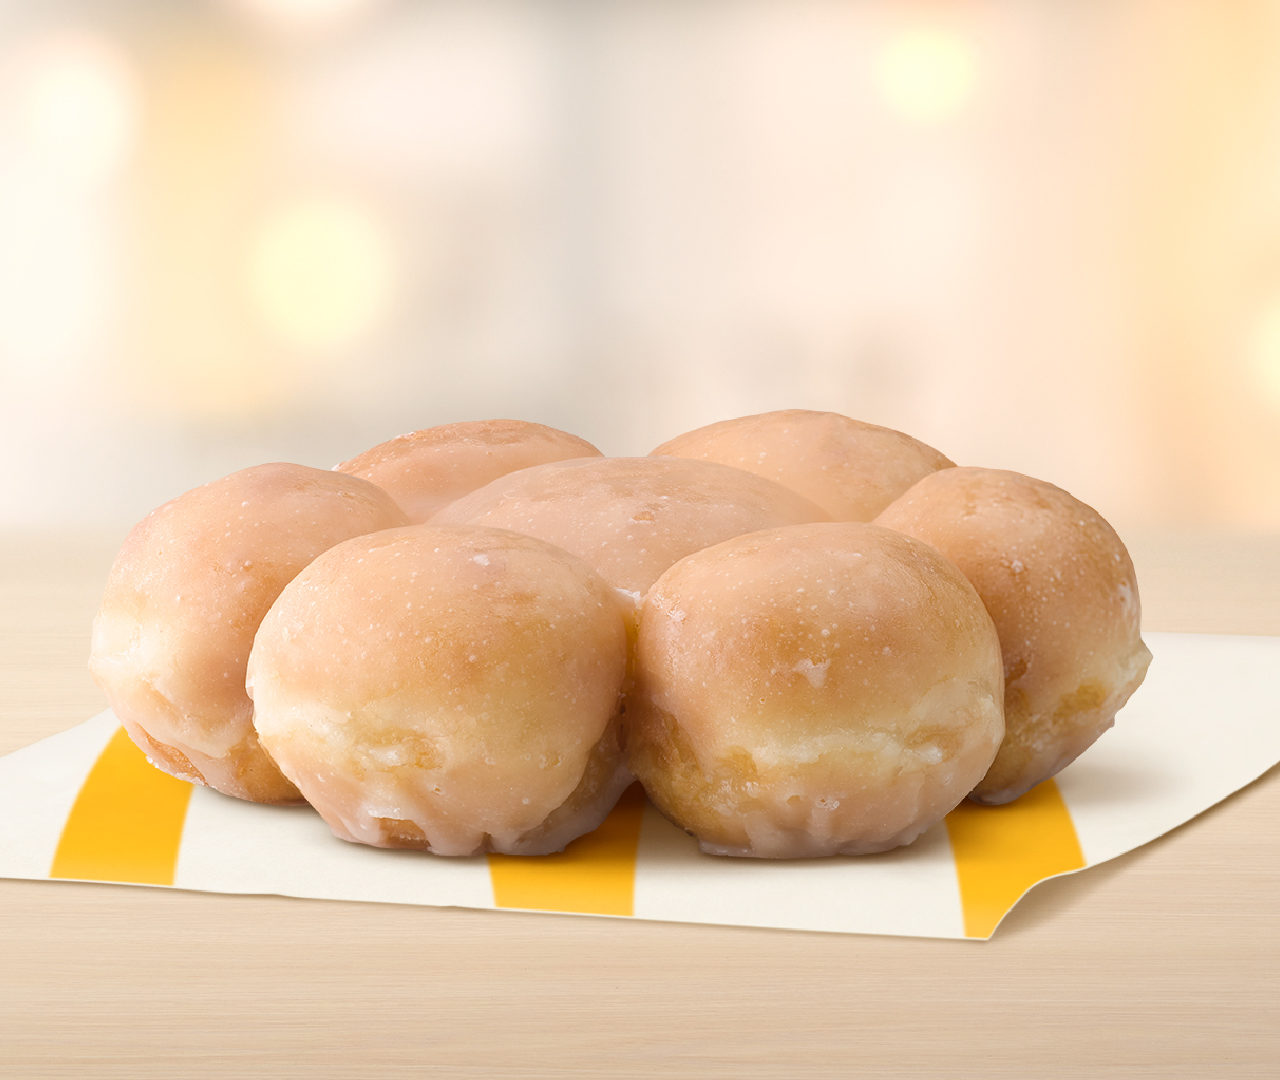 Attention Donut Lovers! McDonald’s USA Adds New Glazed Pull Apart Donut to the McCafé® Bakery Lineup